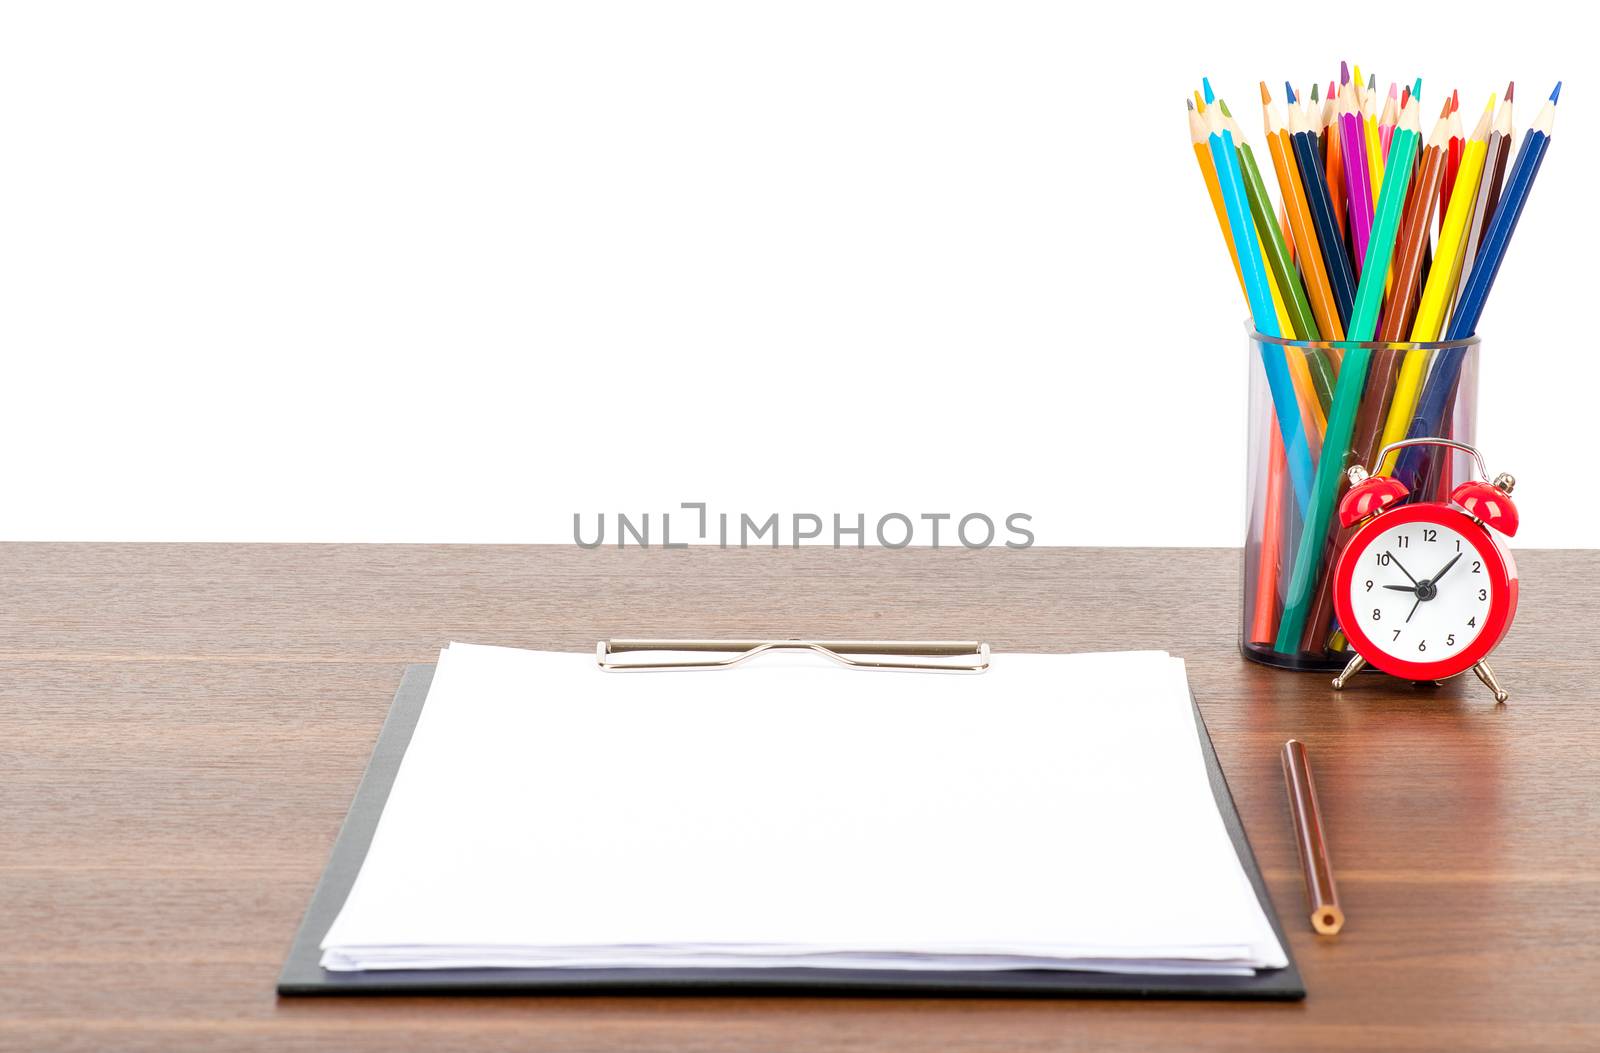 Crayons in pencil cup with folder and alarm clock on table isolated on white background